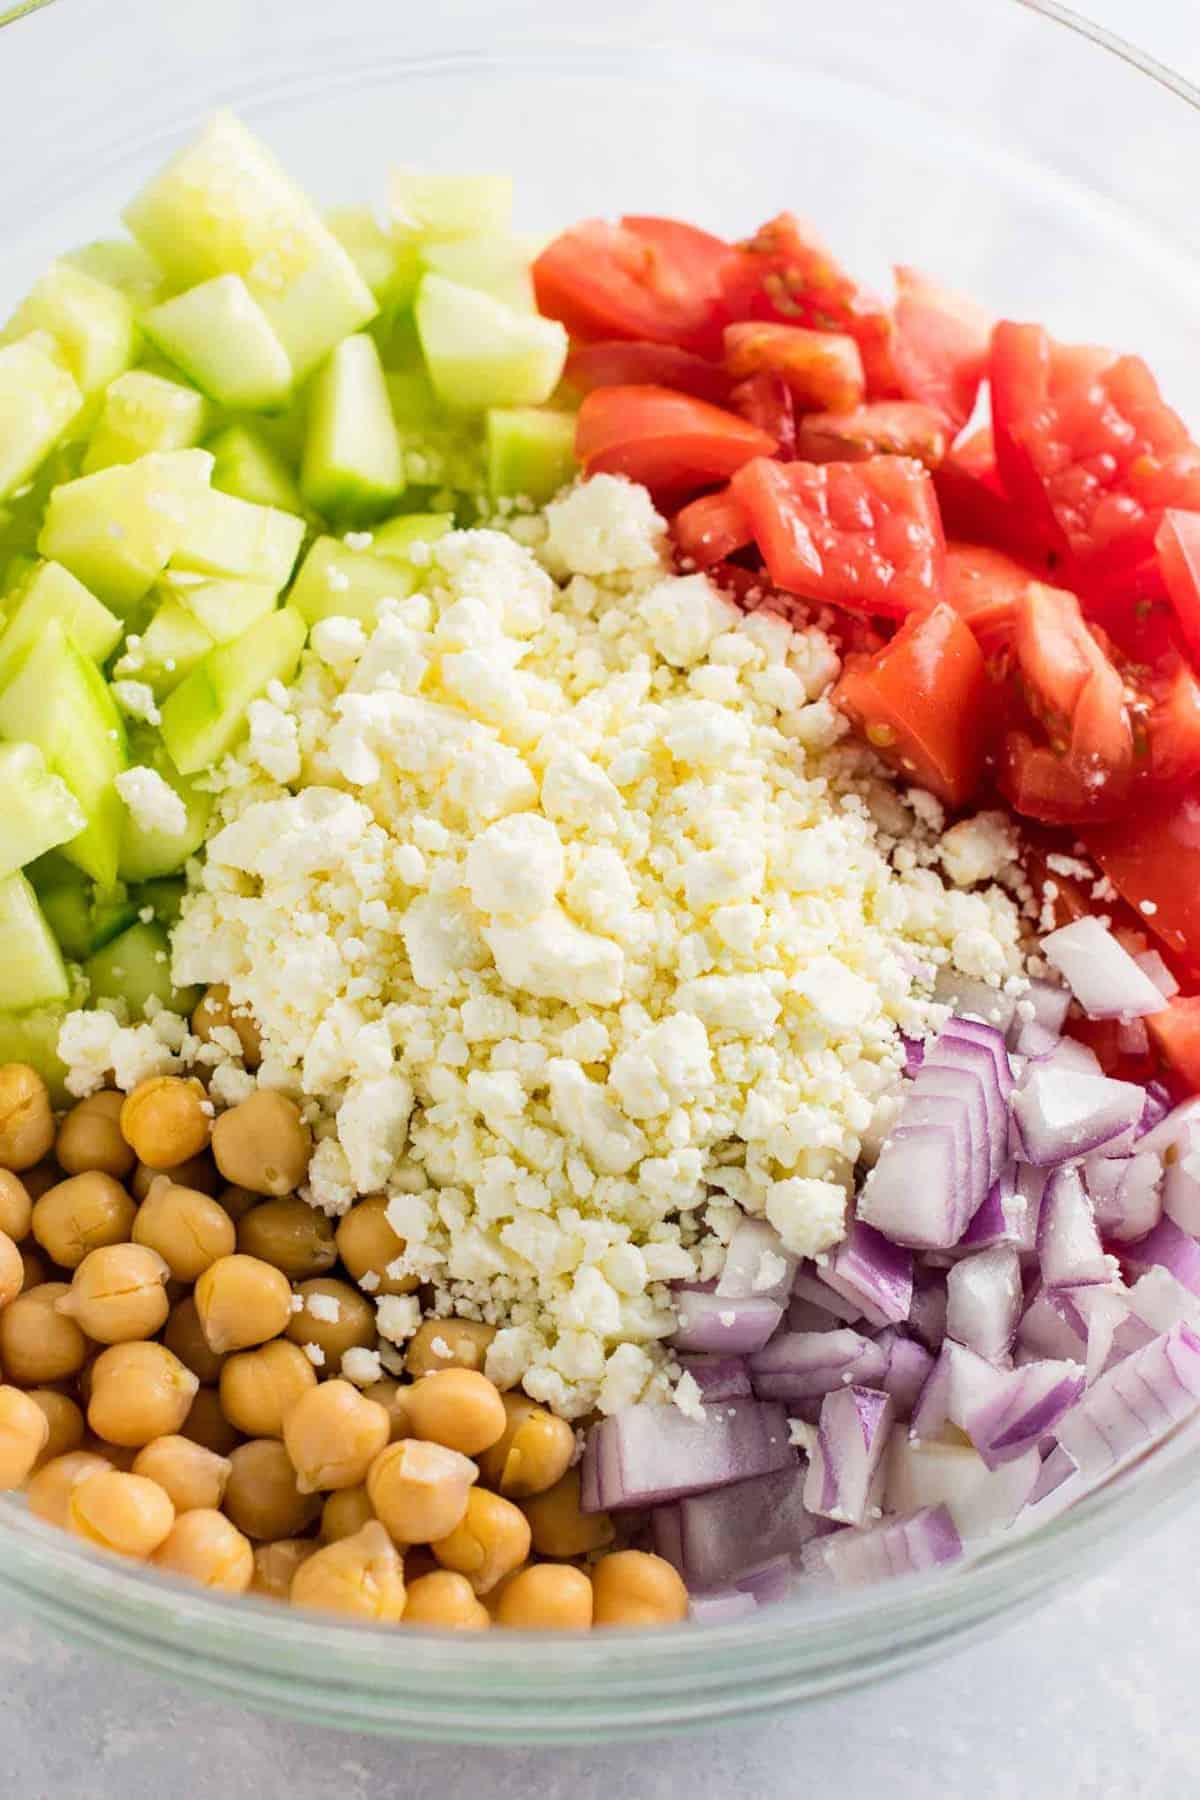 ingredients in a bowl before mixing - cucumbers, feta cheese, red onion, tomatoes, and chickpeas